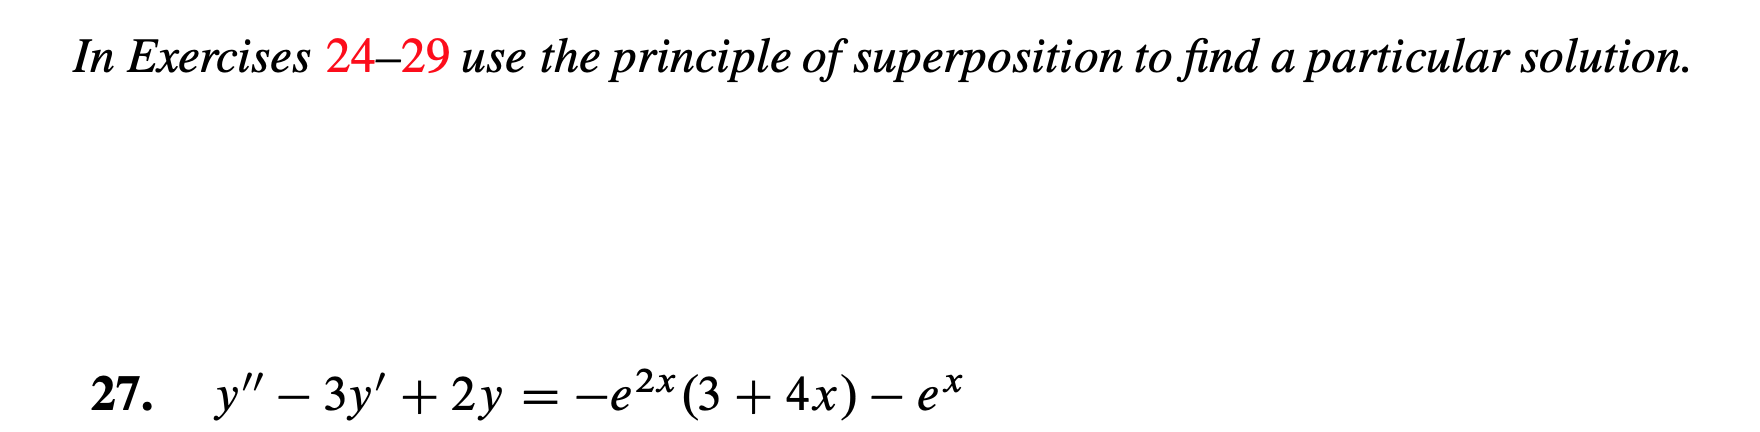 In Exercises 24-29 use the principle of superposition to find a particular solution
— -е2 (3 + 4х) — е*
у" — Зу' +2у
27.
